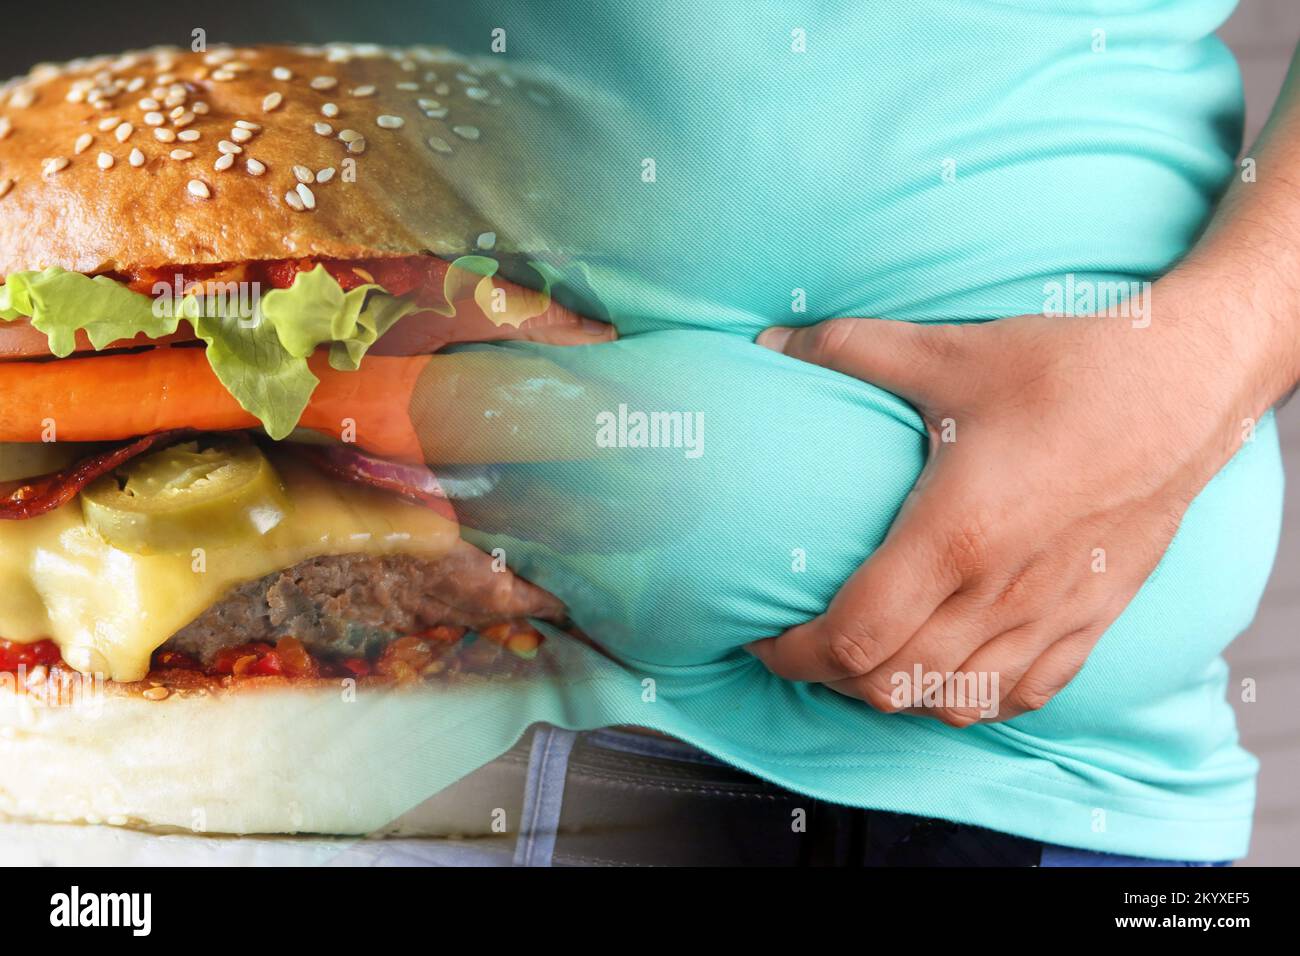 Obesity and junk food. Man holding his belly fat and full burger. Stock Photo